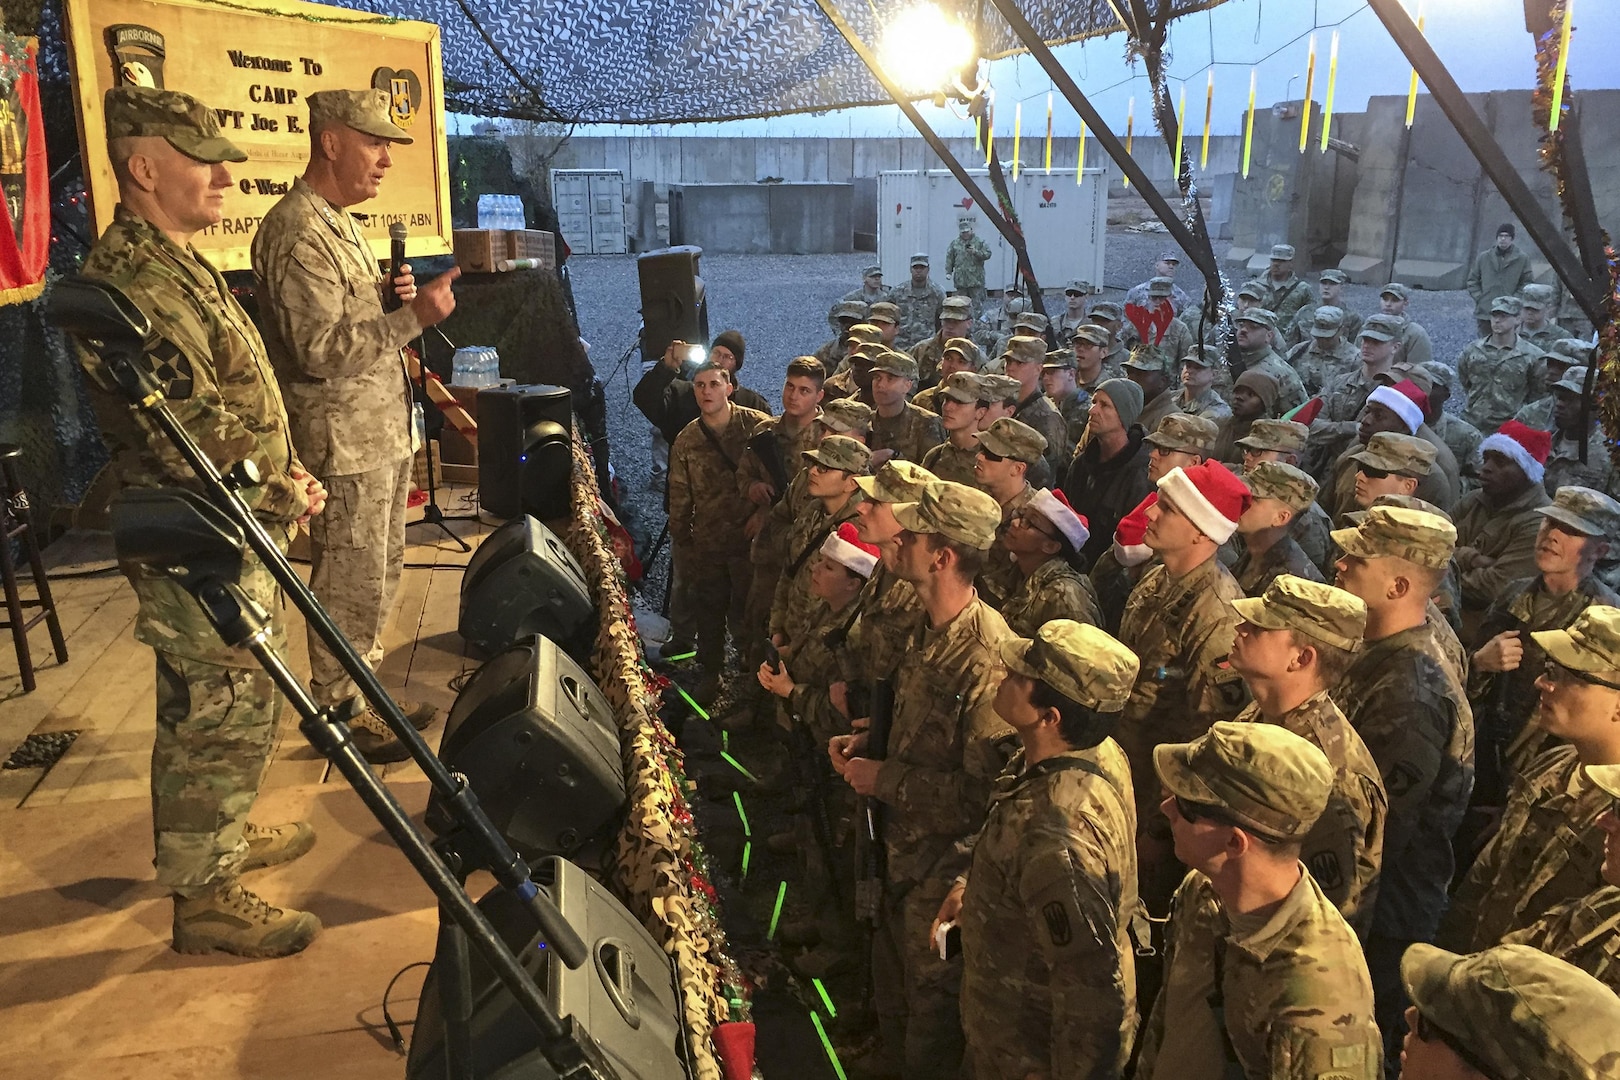 Marine Corps Gen. Joe Dunford, chairman of the Joint Chiefs of Staff, tells service members at Qayyarah West Airfield, Iraq, Dec. 25, 2016, that they are making a difference in the fight against the Islamic State of Iraq and the Levant, and proving that American sacrifices in Iraq are worth it. Dunford brought a USO show to the base for Christmas. DoD photo by Jim Garamone